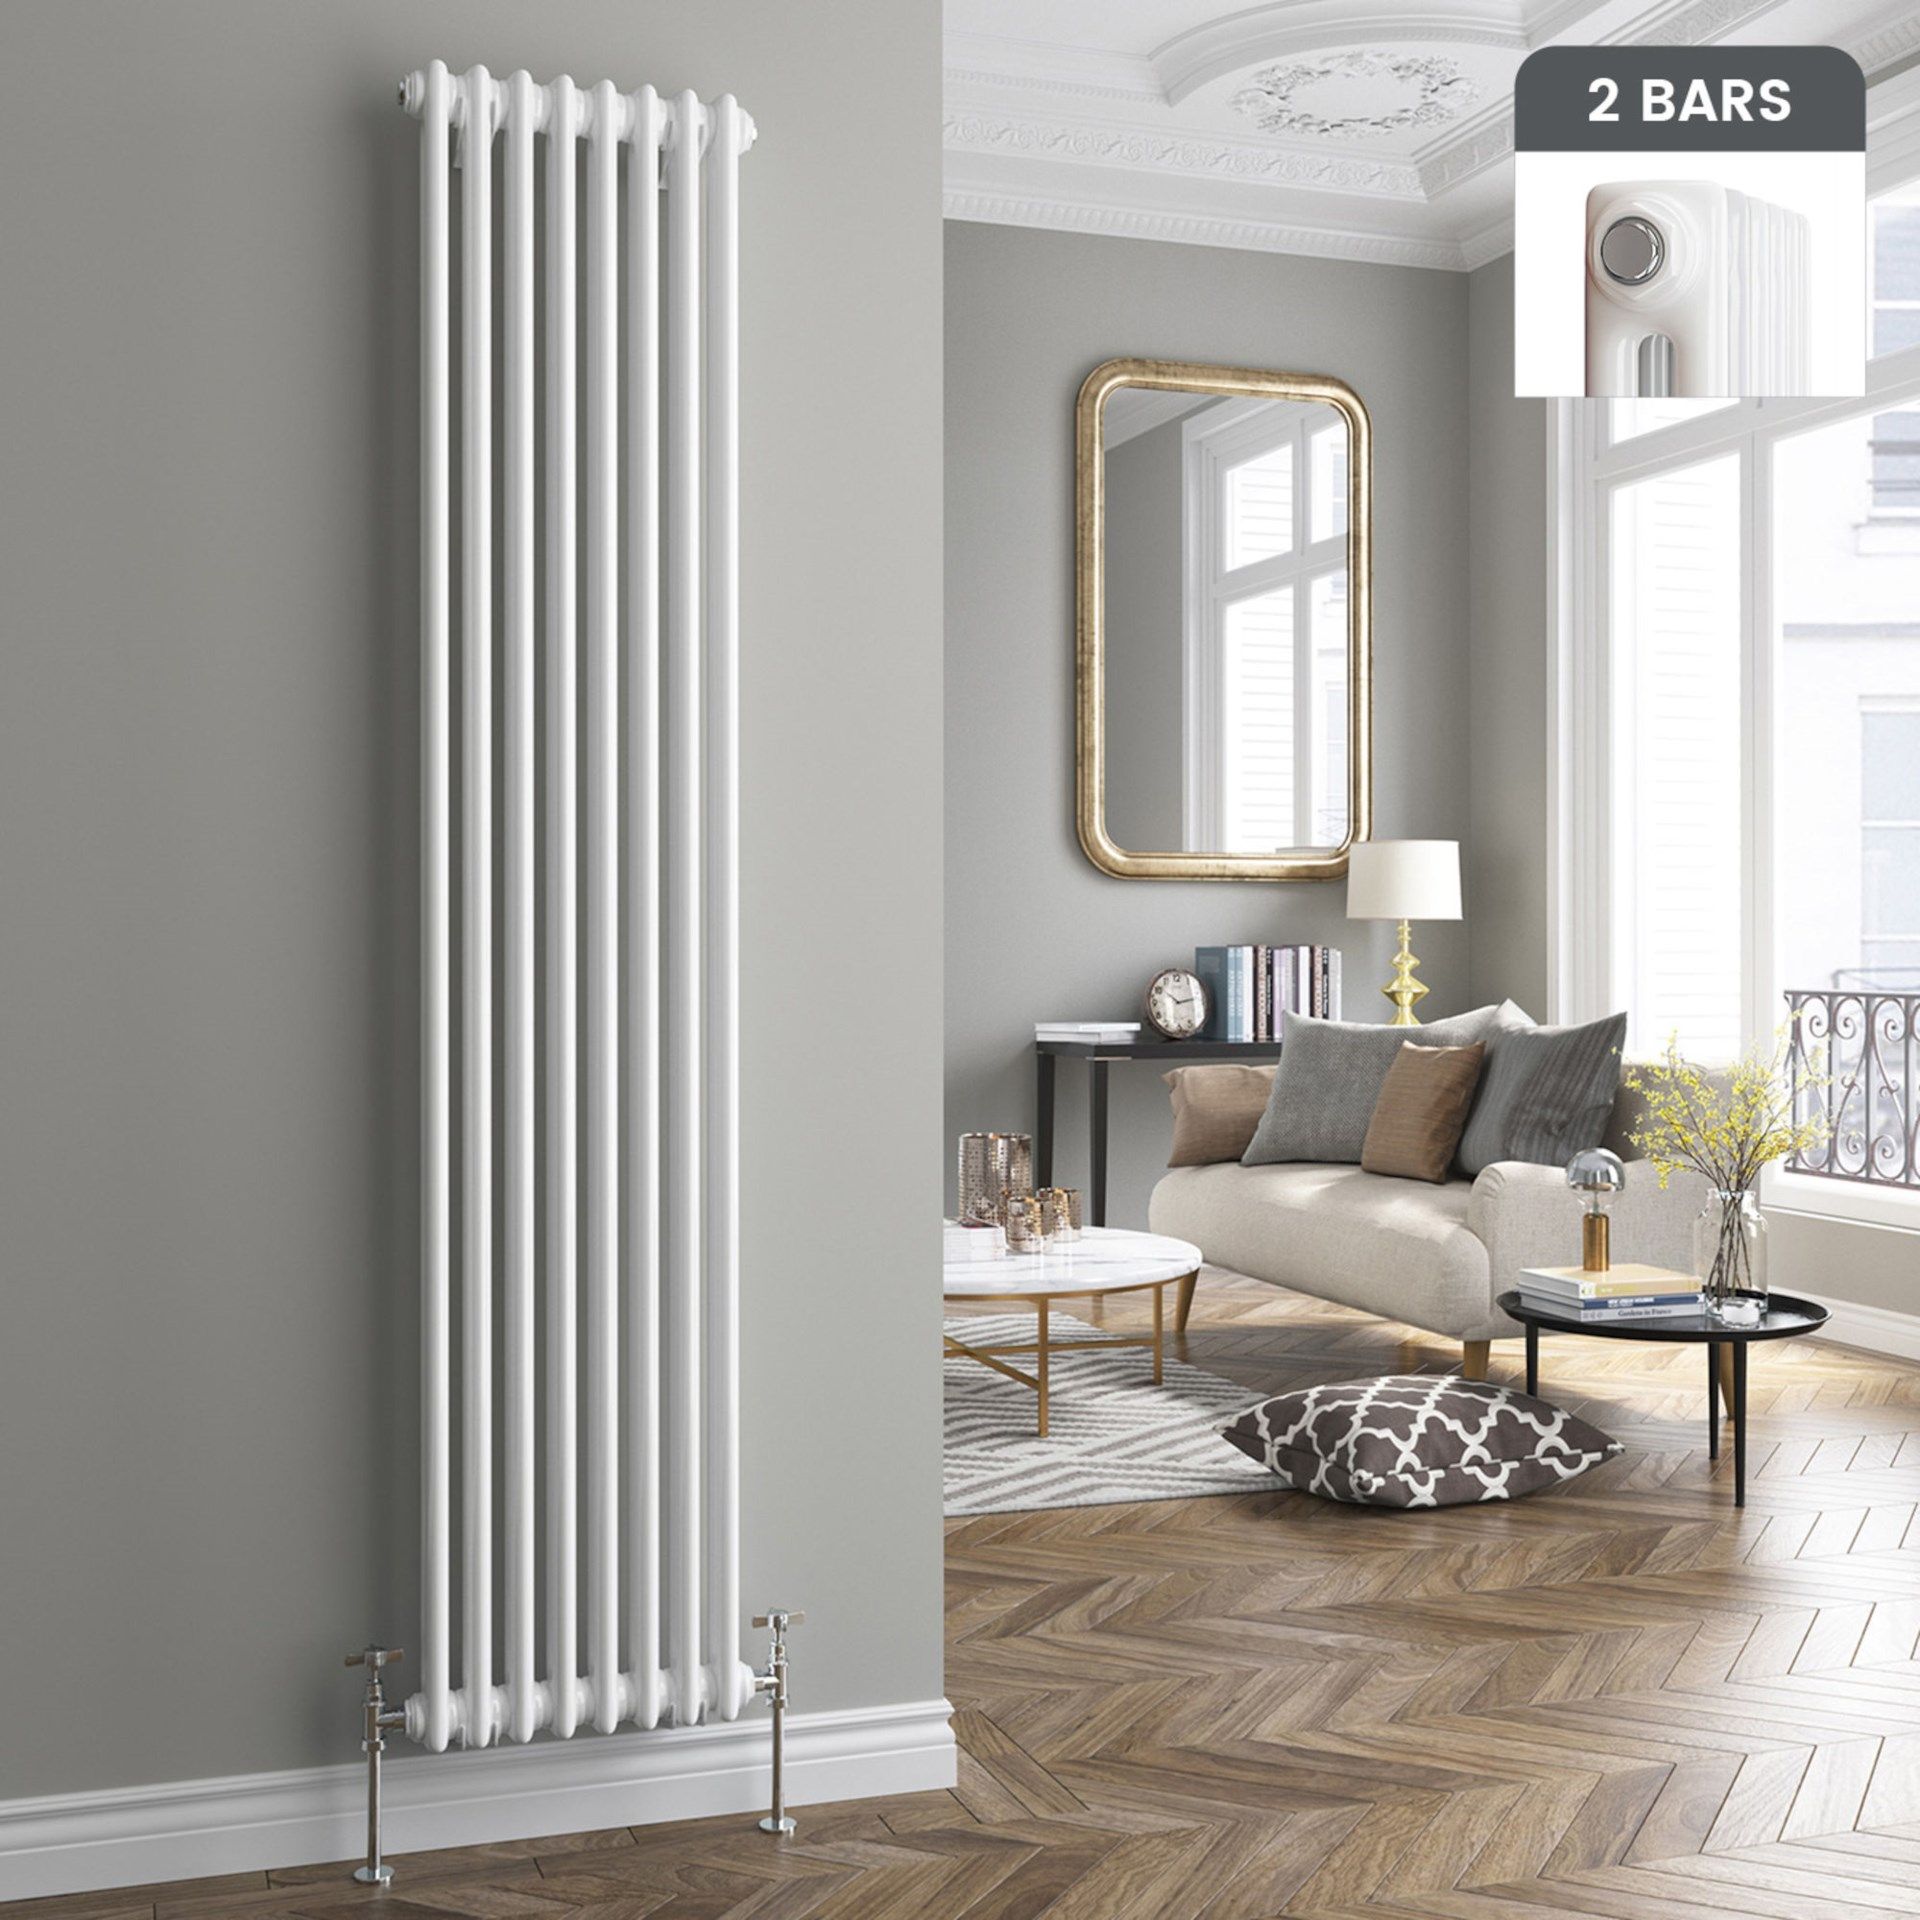 (JL83) 2000x490mm White Double Panel Vertical Colosseum Traditional Radiator. RRP £528.99.((JL83)